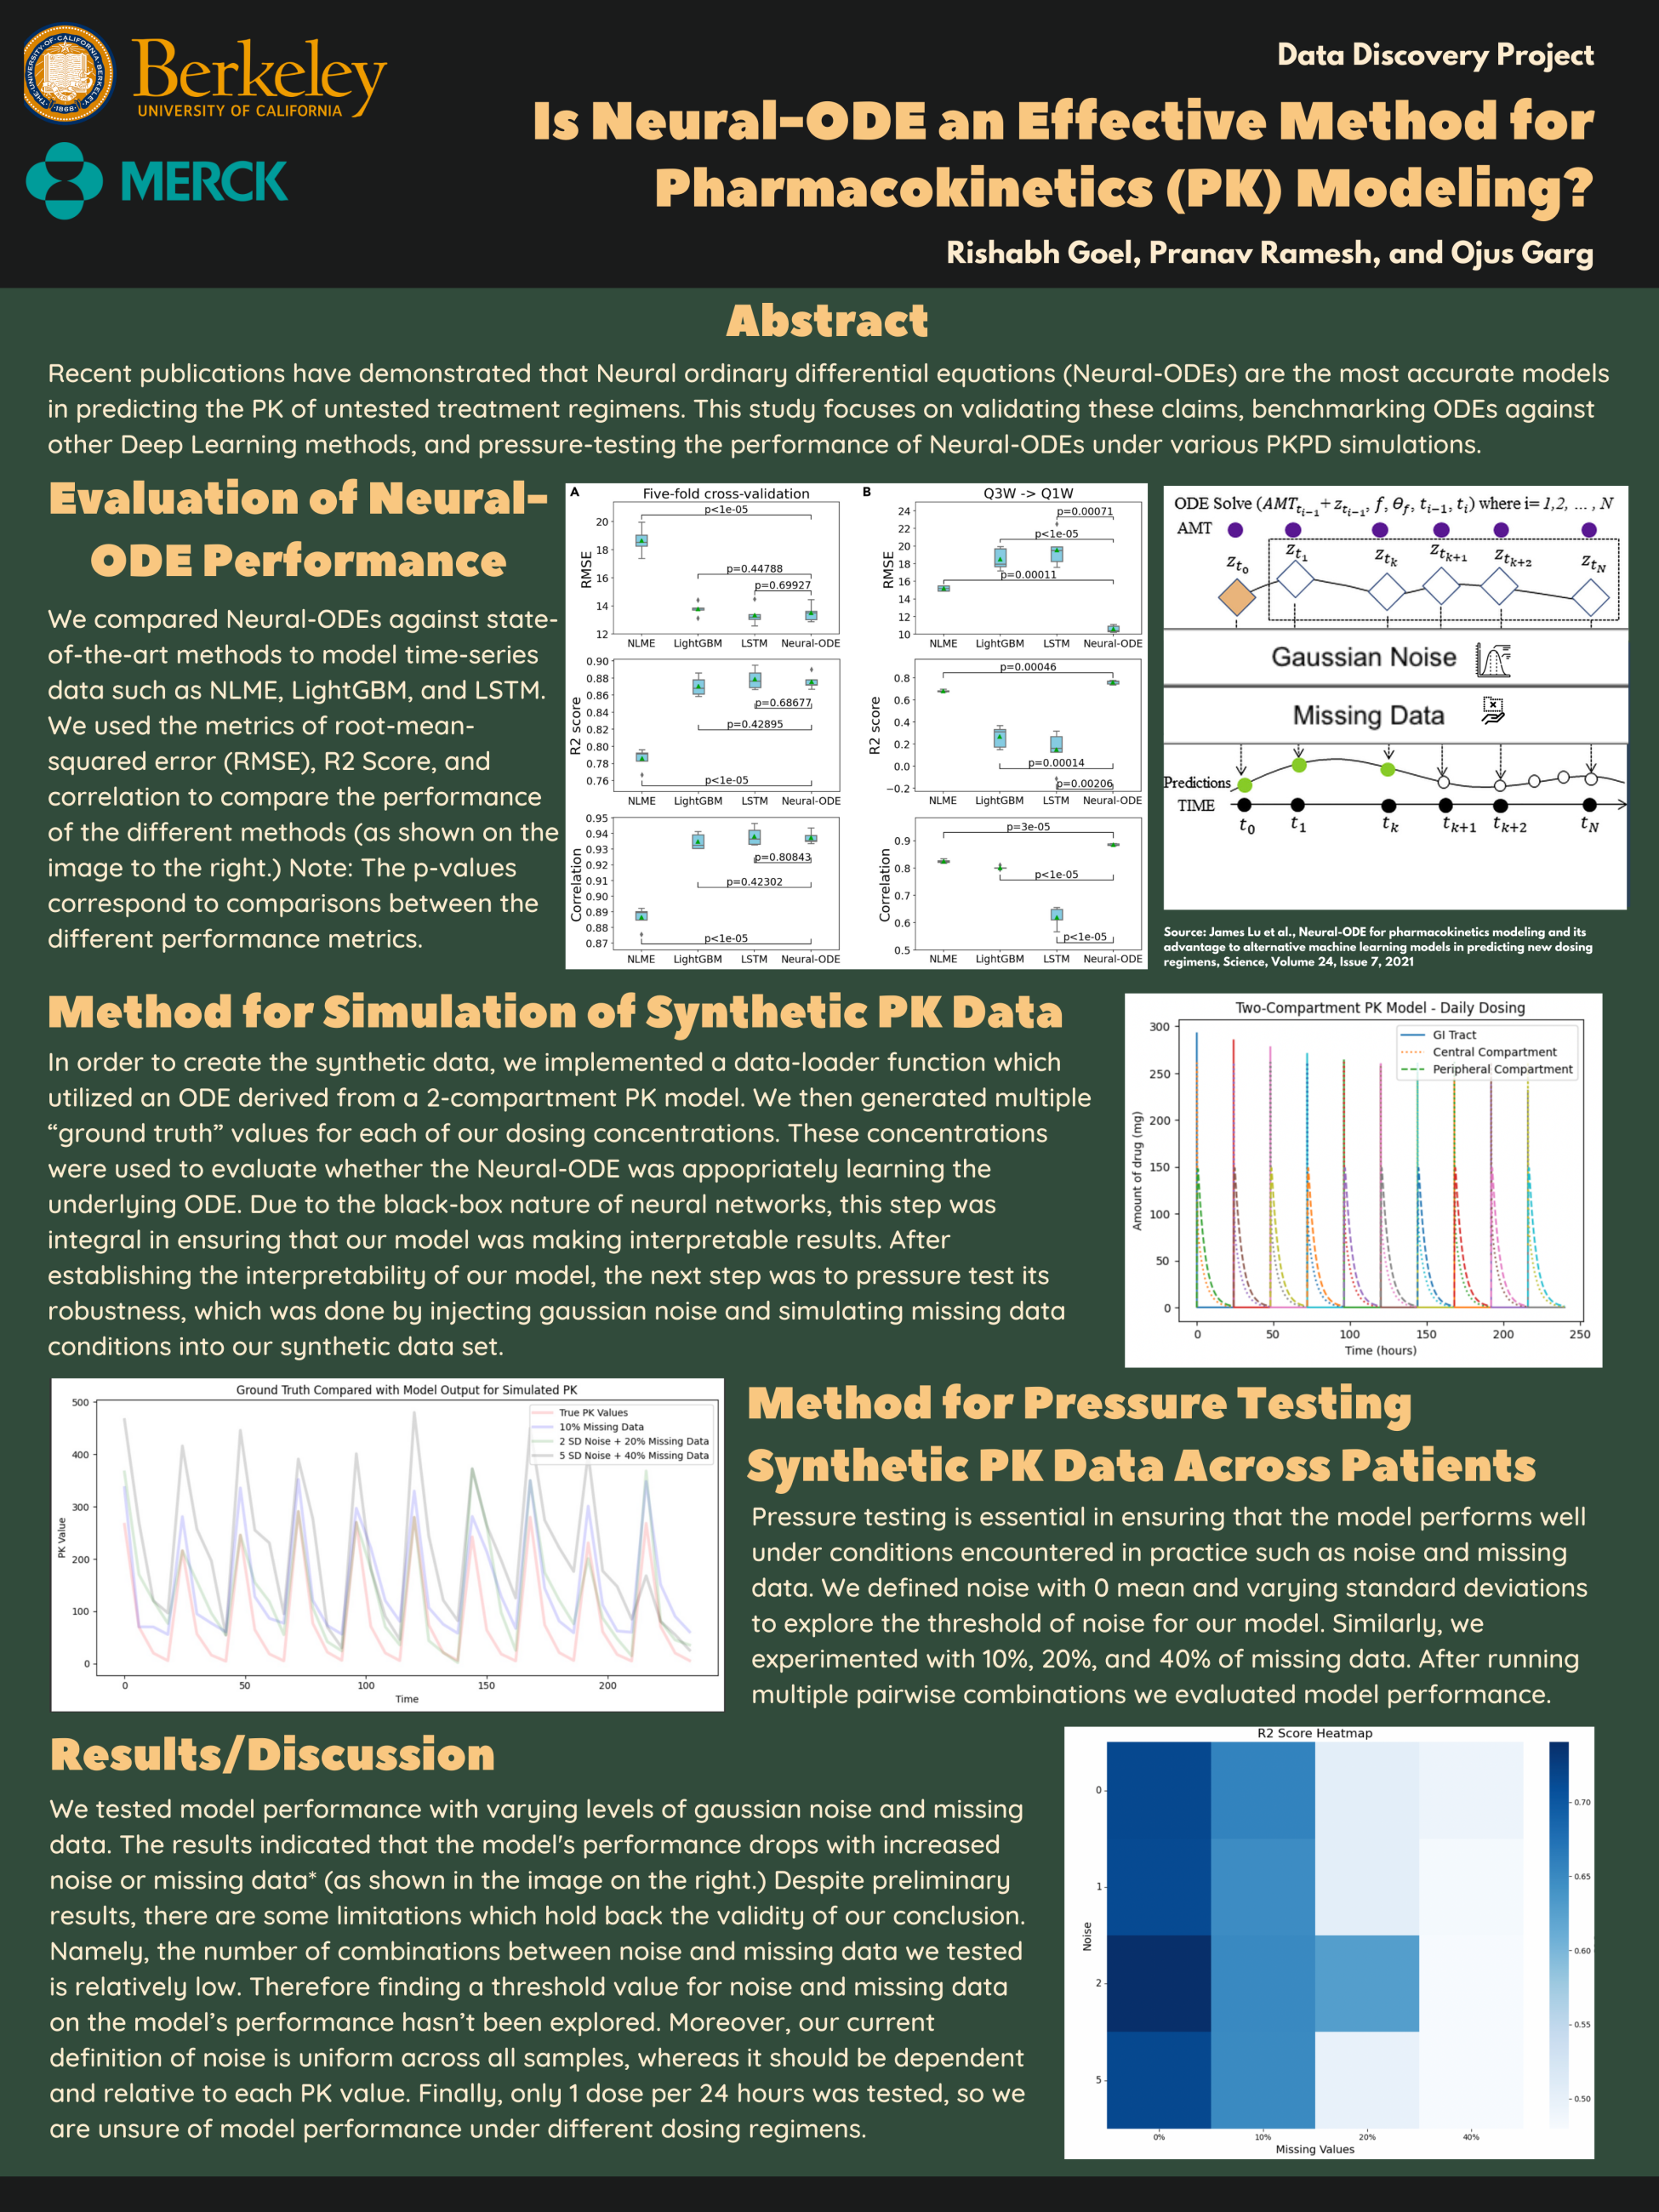 Deep Learning for Pharmacokinetics/Pharmacodynamics - Spring 2023 Discovery Project